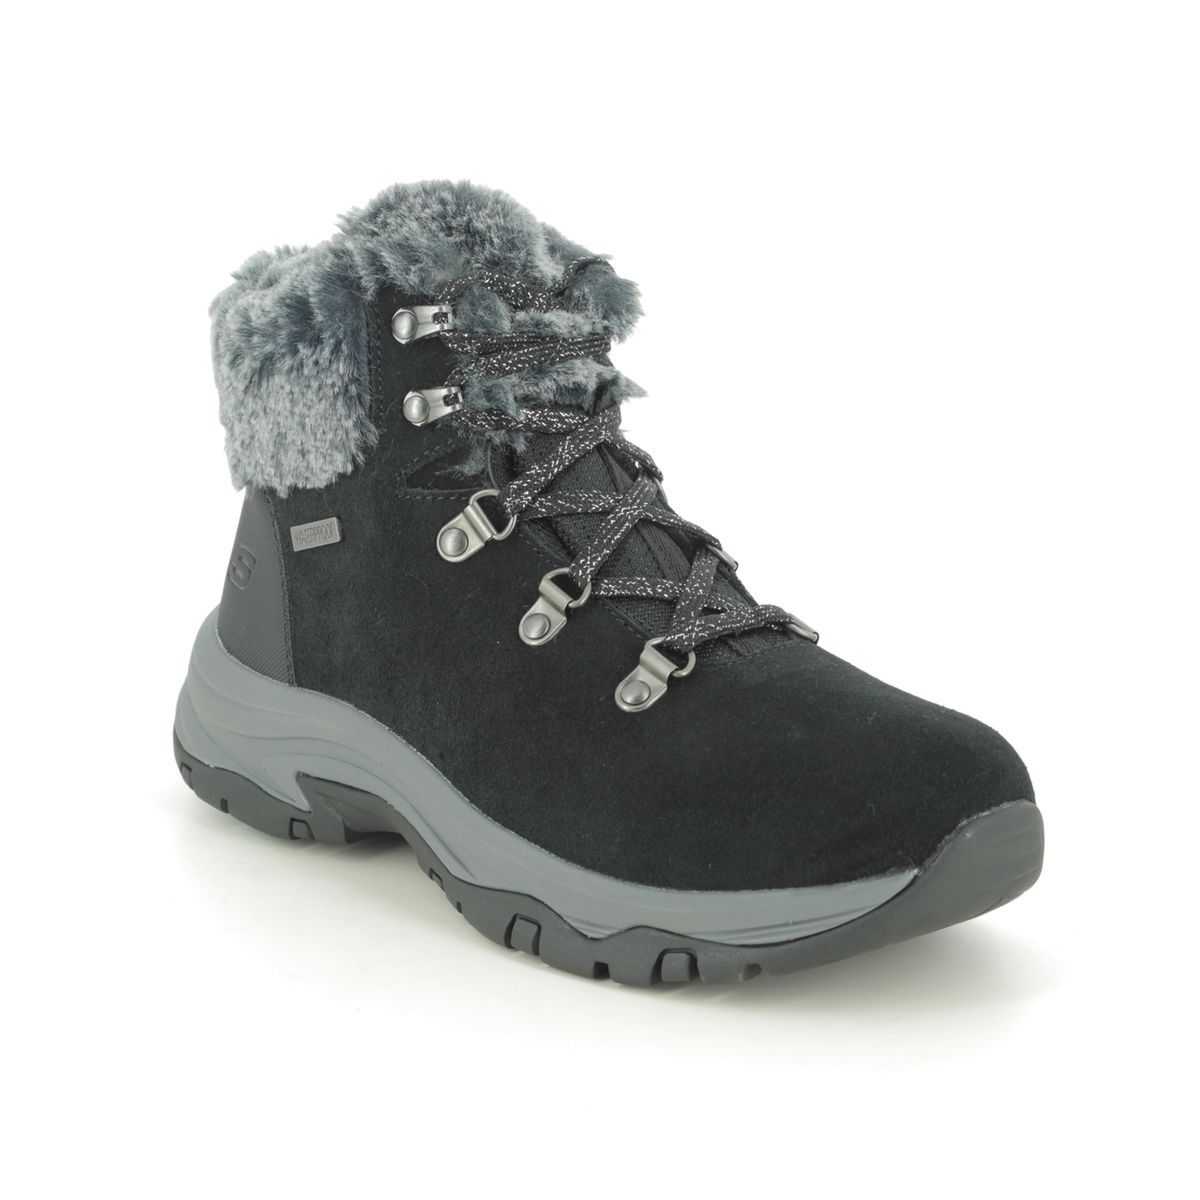 skechers winter collection